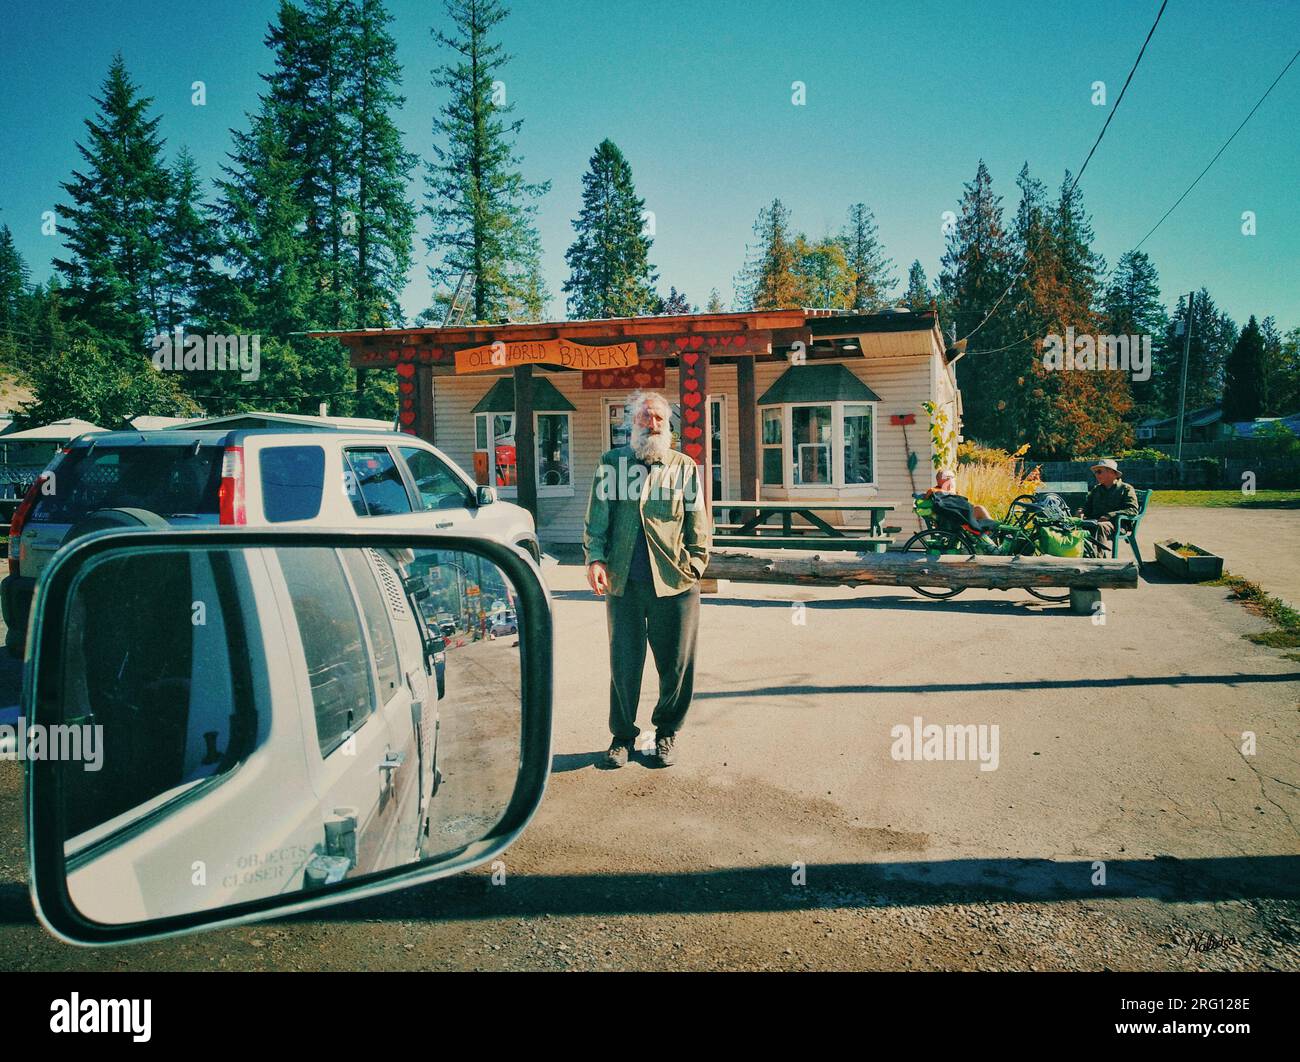 British Columbia, Canada - September 25, 2021: View from side view mirror over looking street scene and landscape near Ferry Landing Road, Balfour, BC Stock Photo